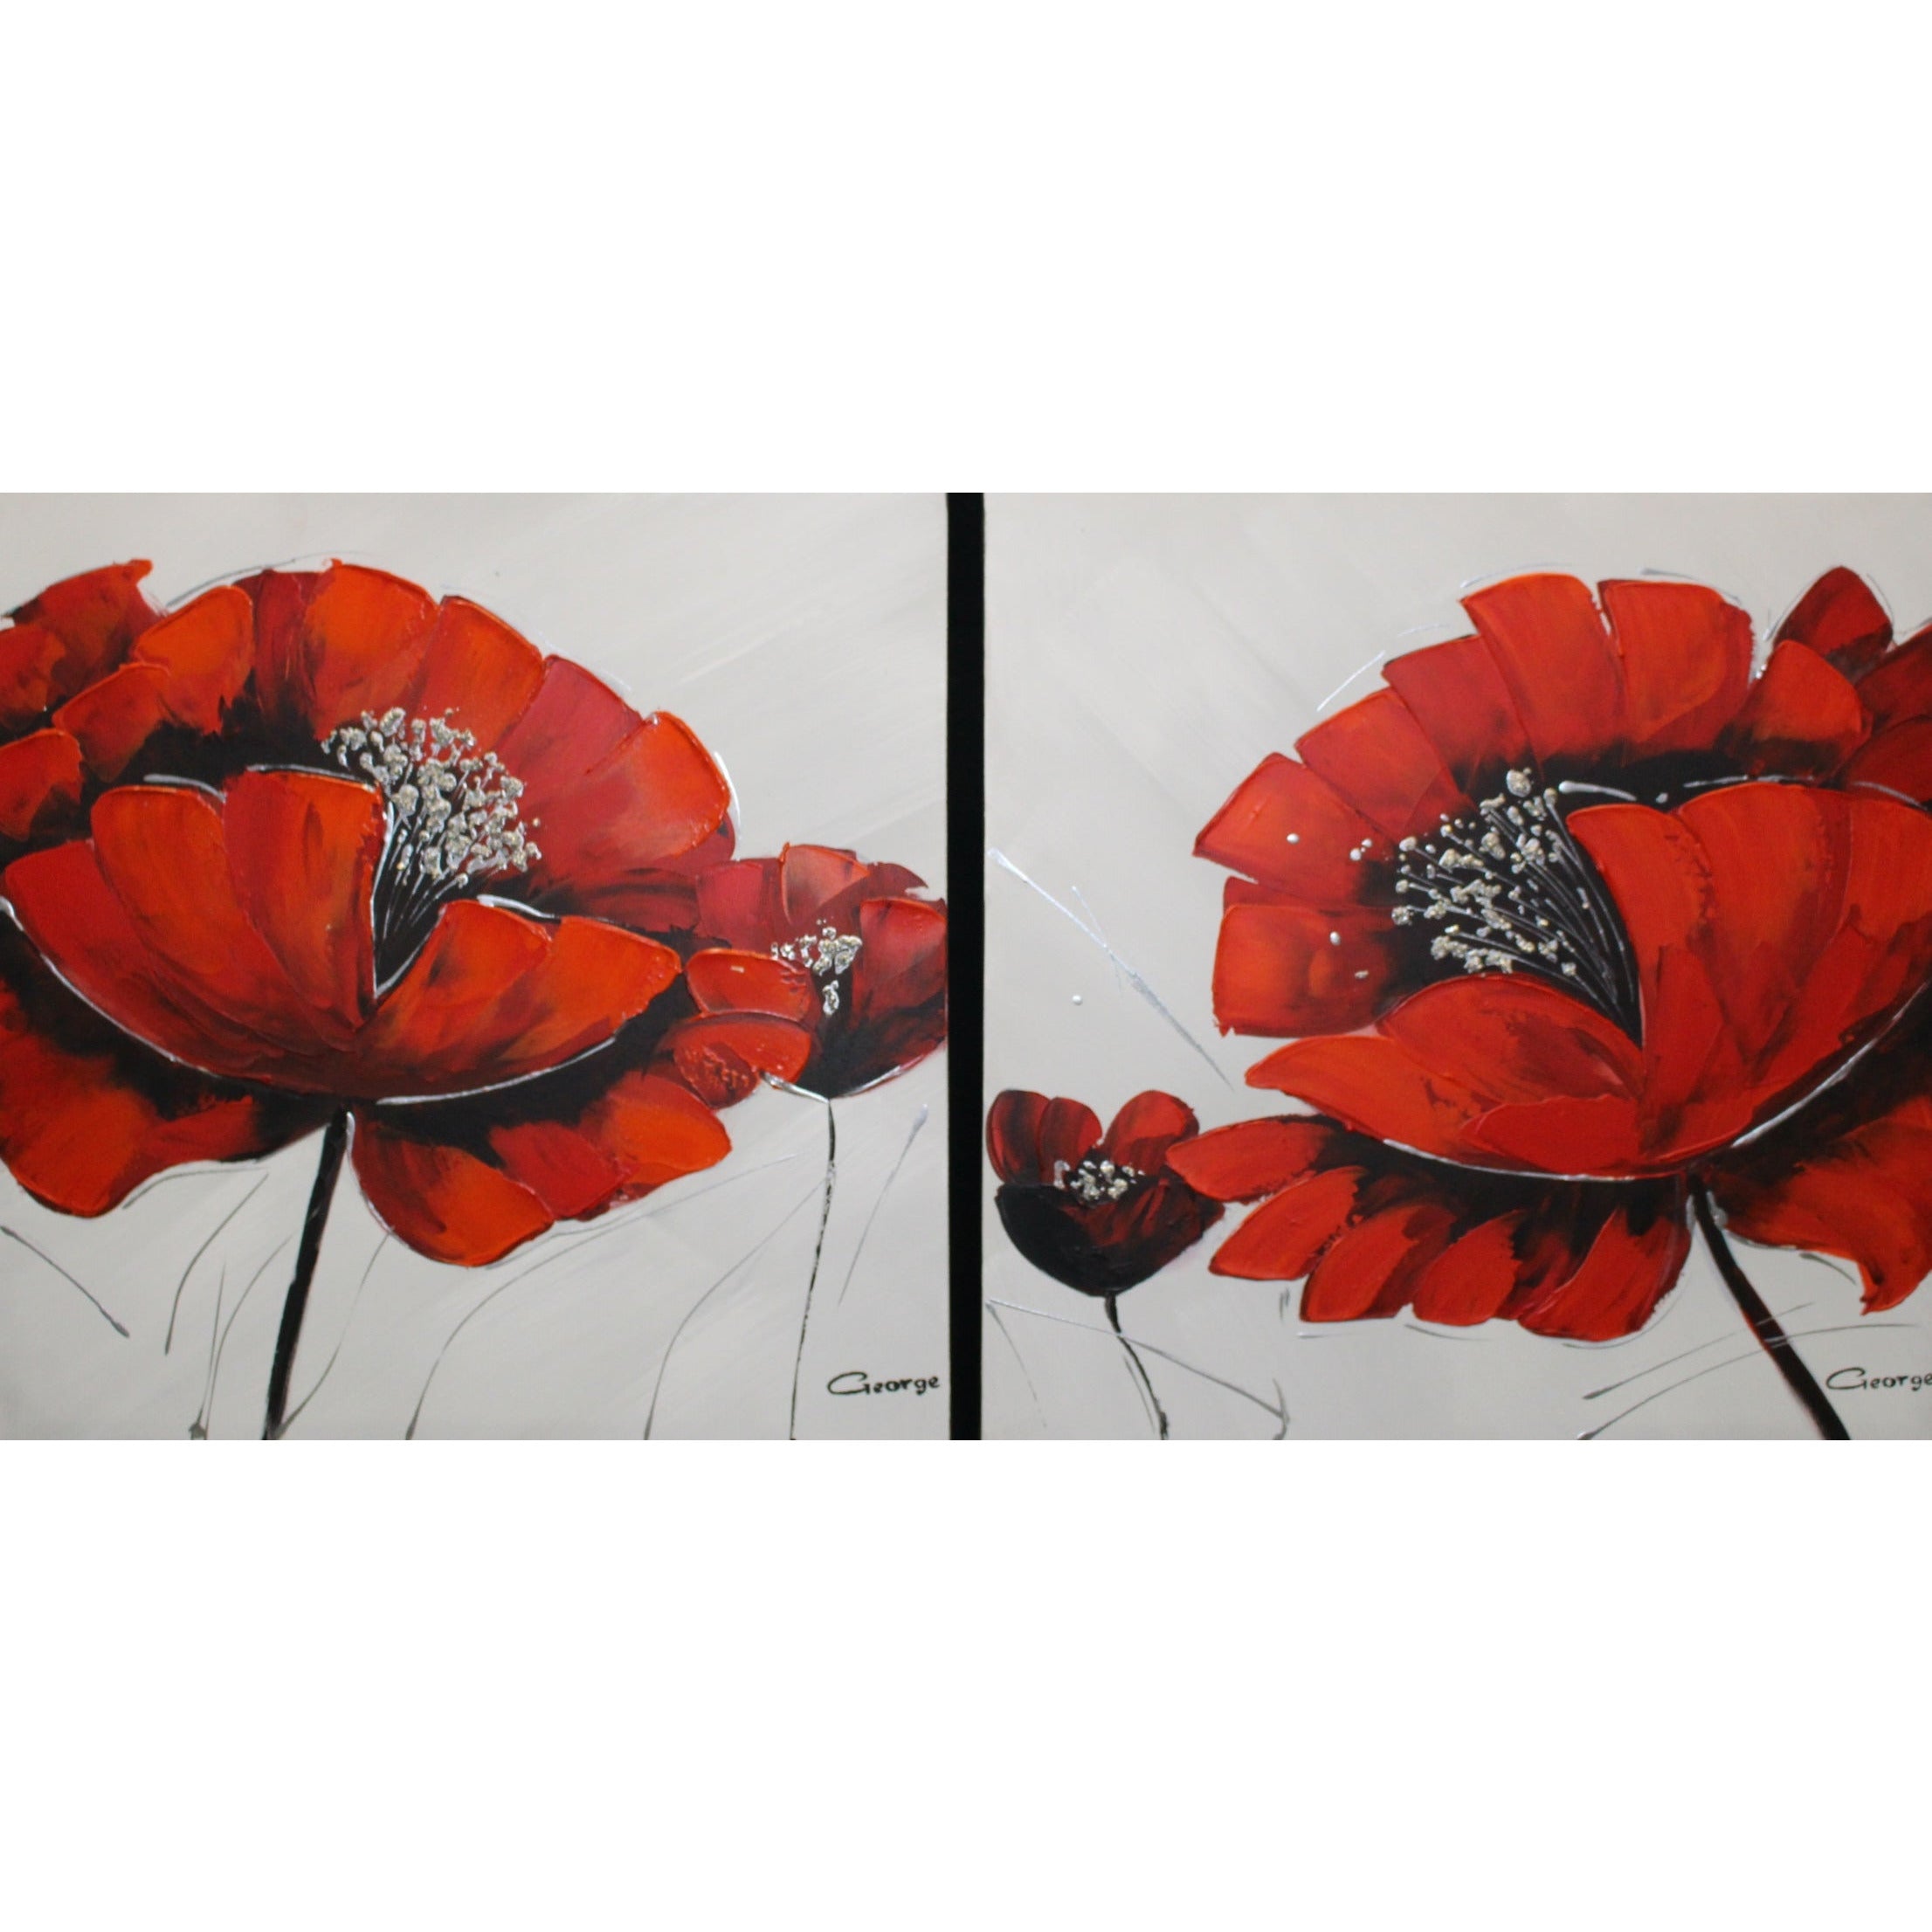 Oil painting | set of 2x 60x60 cm | Painting |